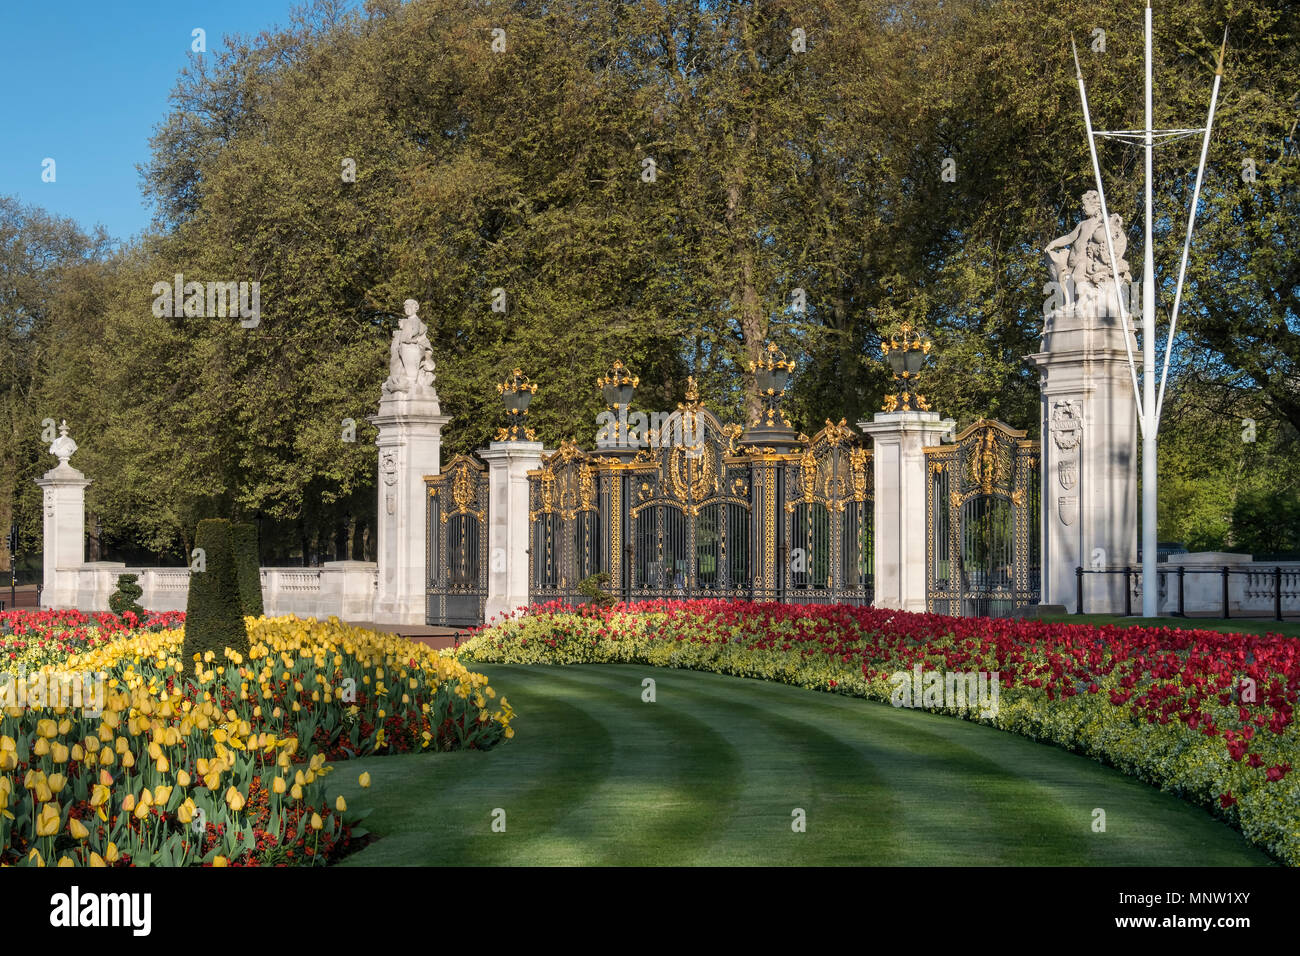 Canada Gate at the entrance to Green Park in spring, Buckingham Palace, London, England, UK Stock Photo